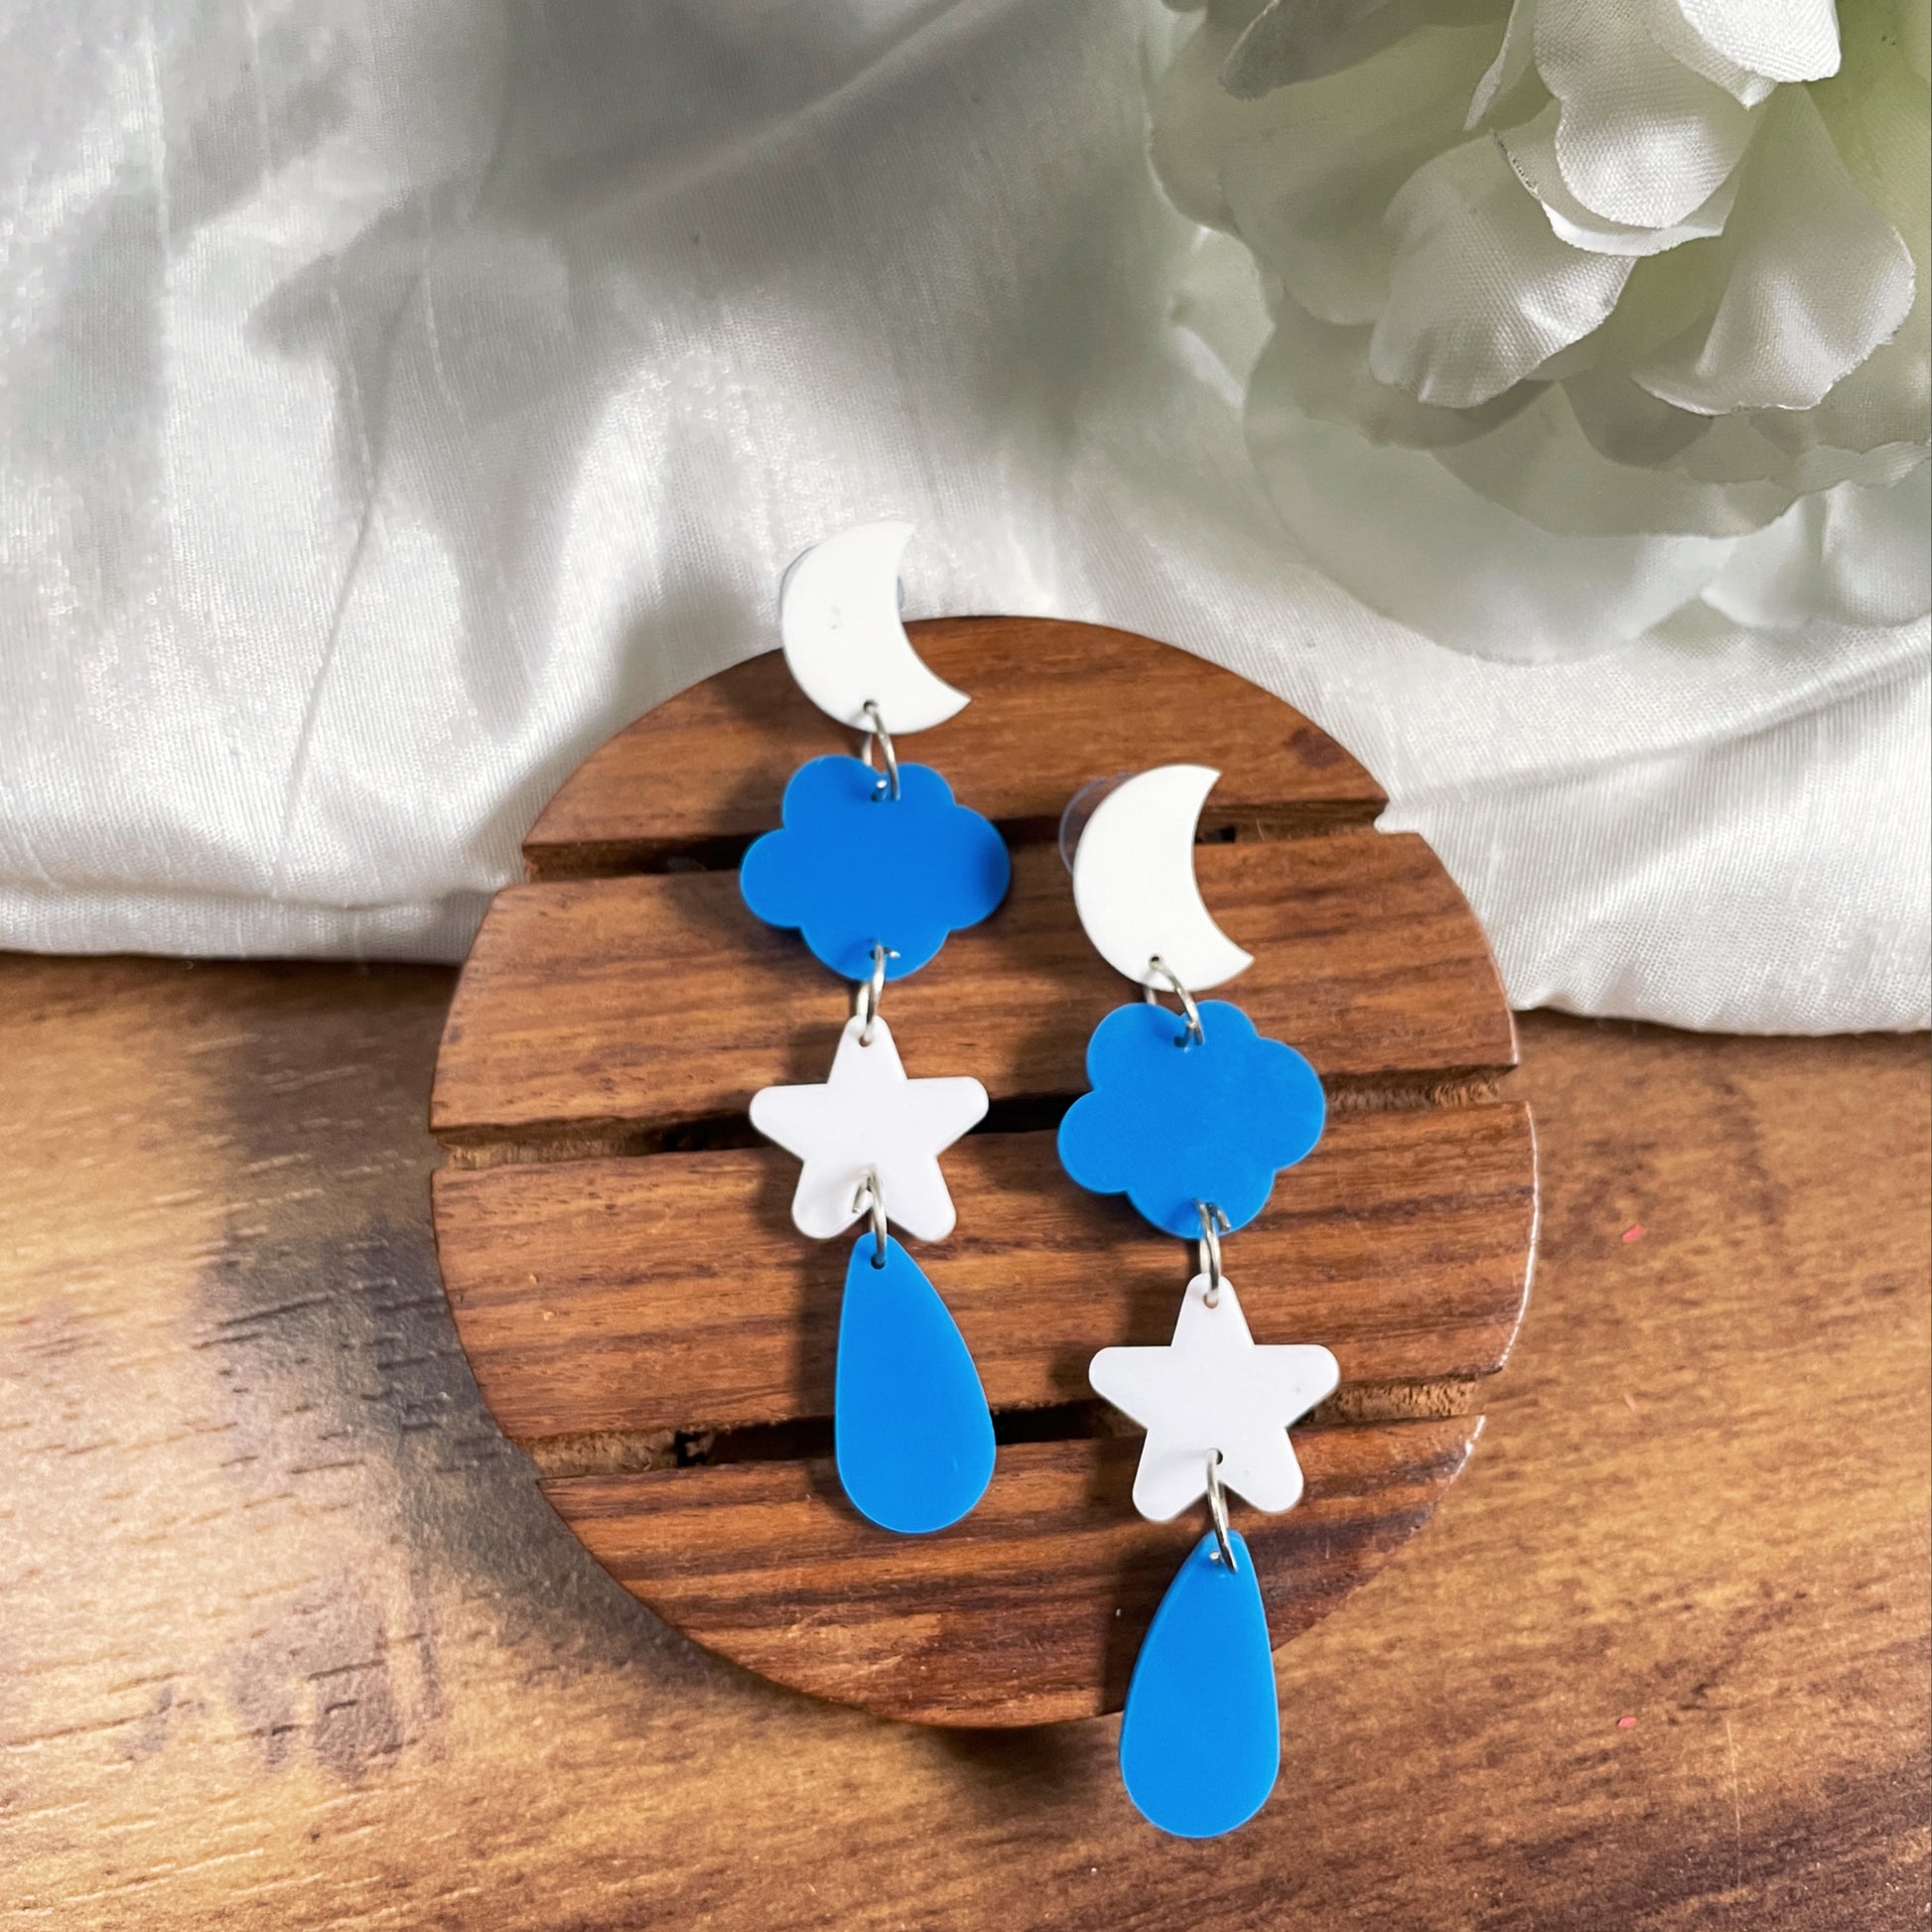 Galaxy Earrings - Blue and White consisting of stars, clouds, moon, and raindrops - Nian by Nidhi - in a white and brown background